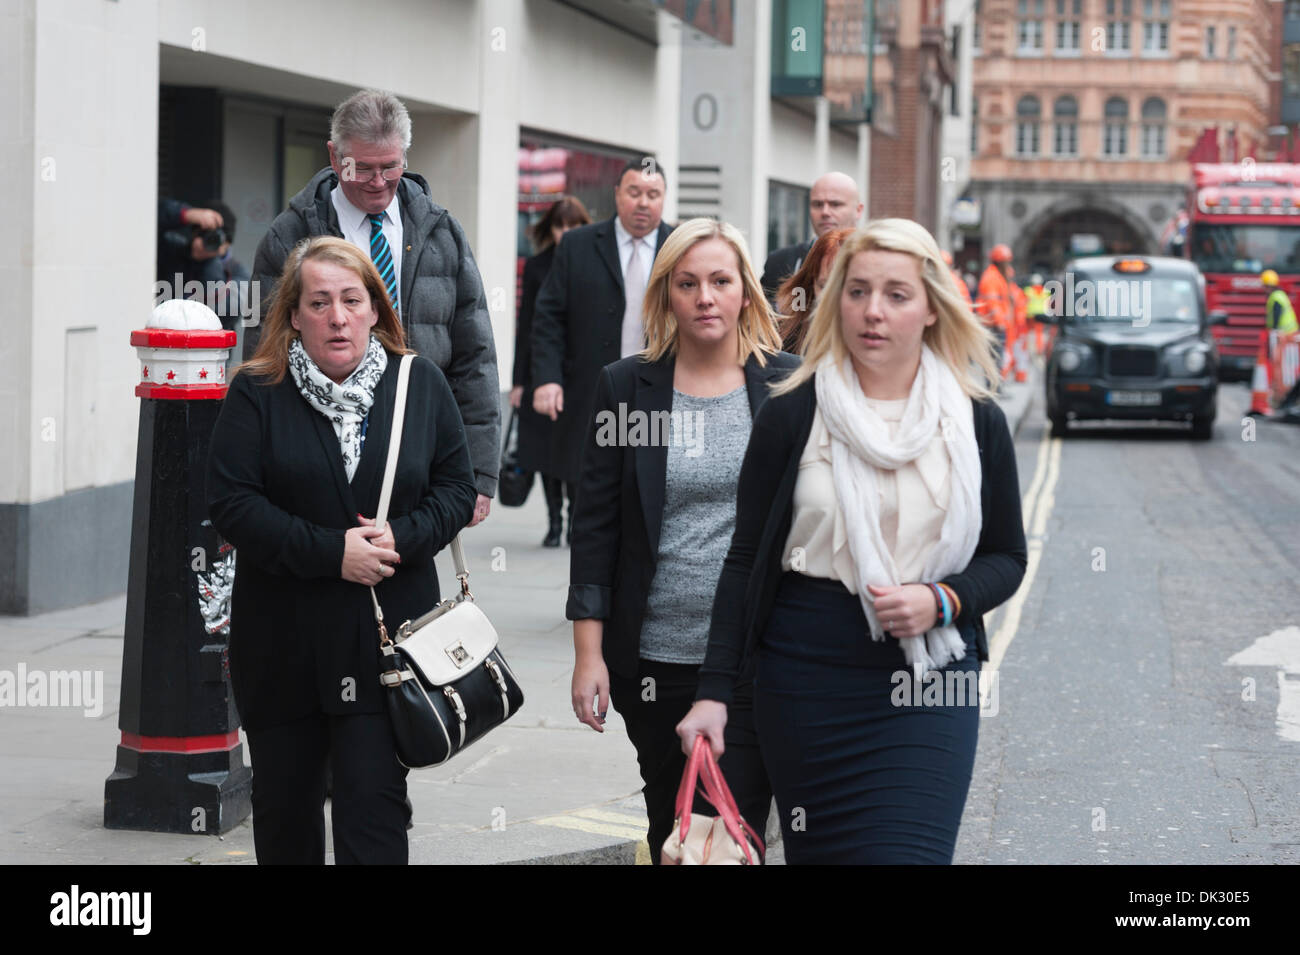 London, UK. 2nd December 2013.  Old Bailey. The family of soldier Lee Rigby arrive at the Old Bailey in London for the continued trial of alleged killers, Michael Adebolajo and Michael Adebowale. Mr Rigby was attacked in Woolwich, south east London in May of this year. Credit:  Lee Thomas/Alamy Live News Stock Photo